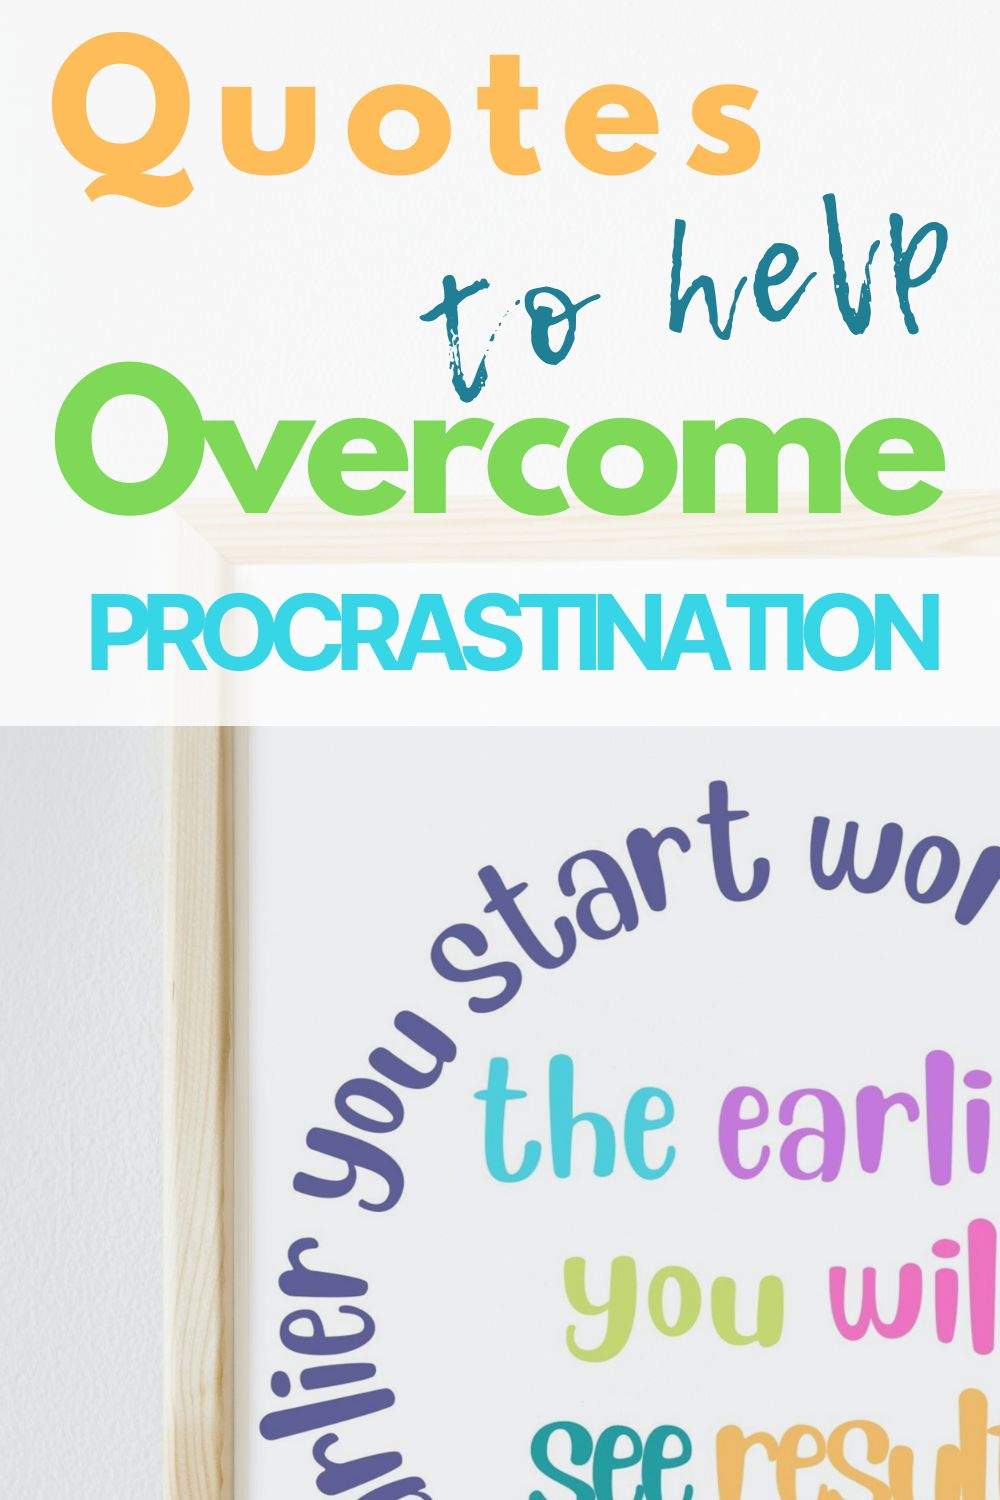 motivational quotes to help you study hard and overcome procrastination